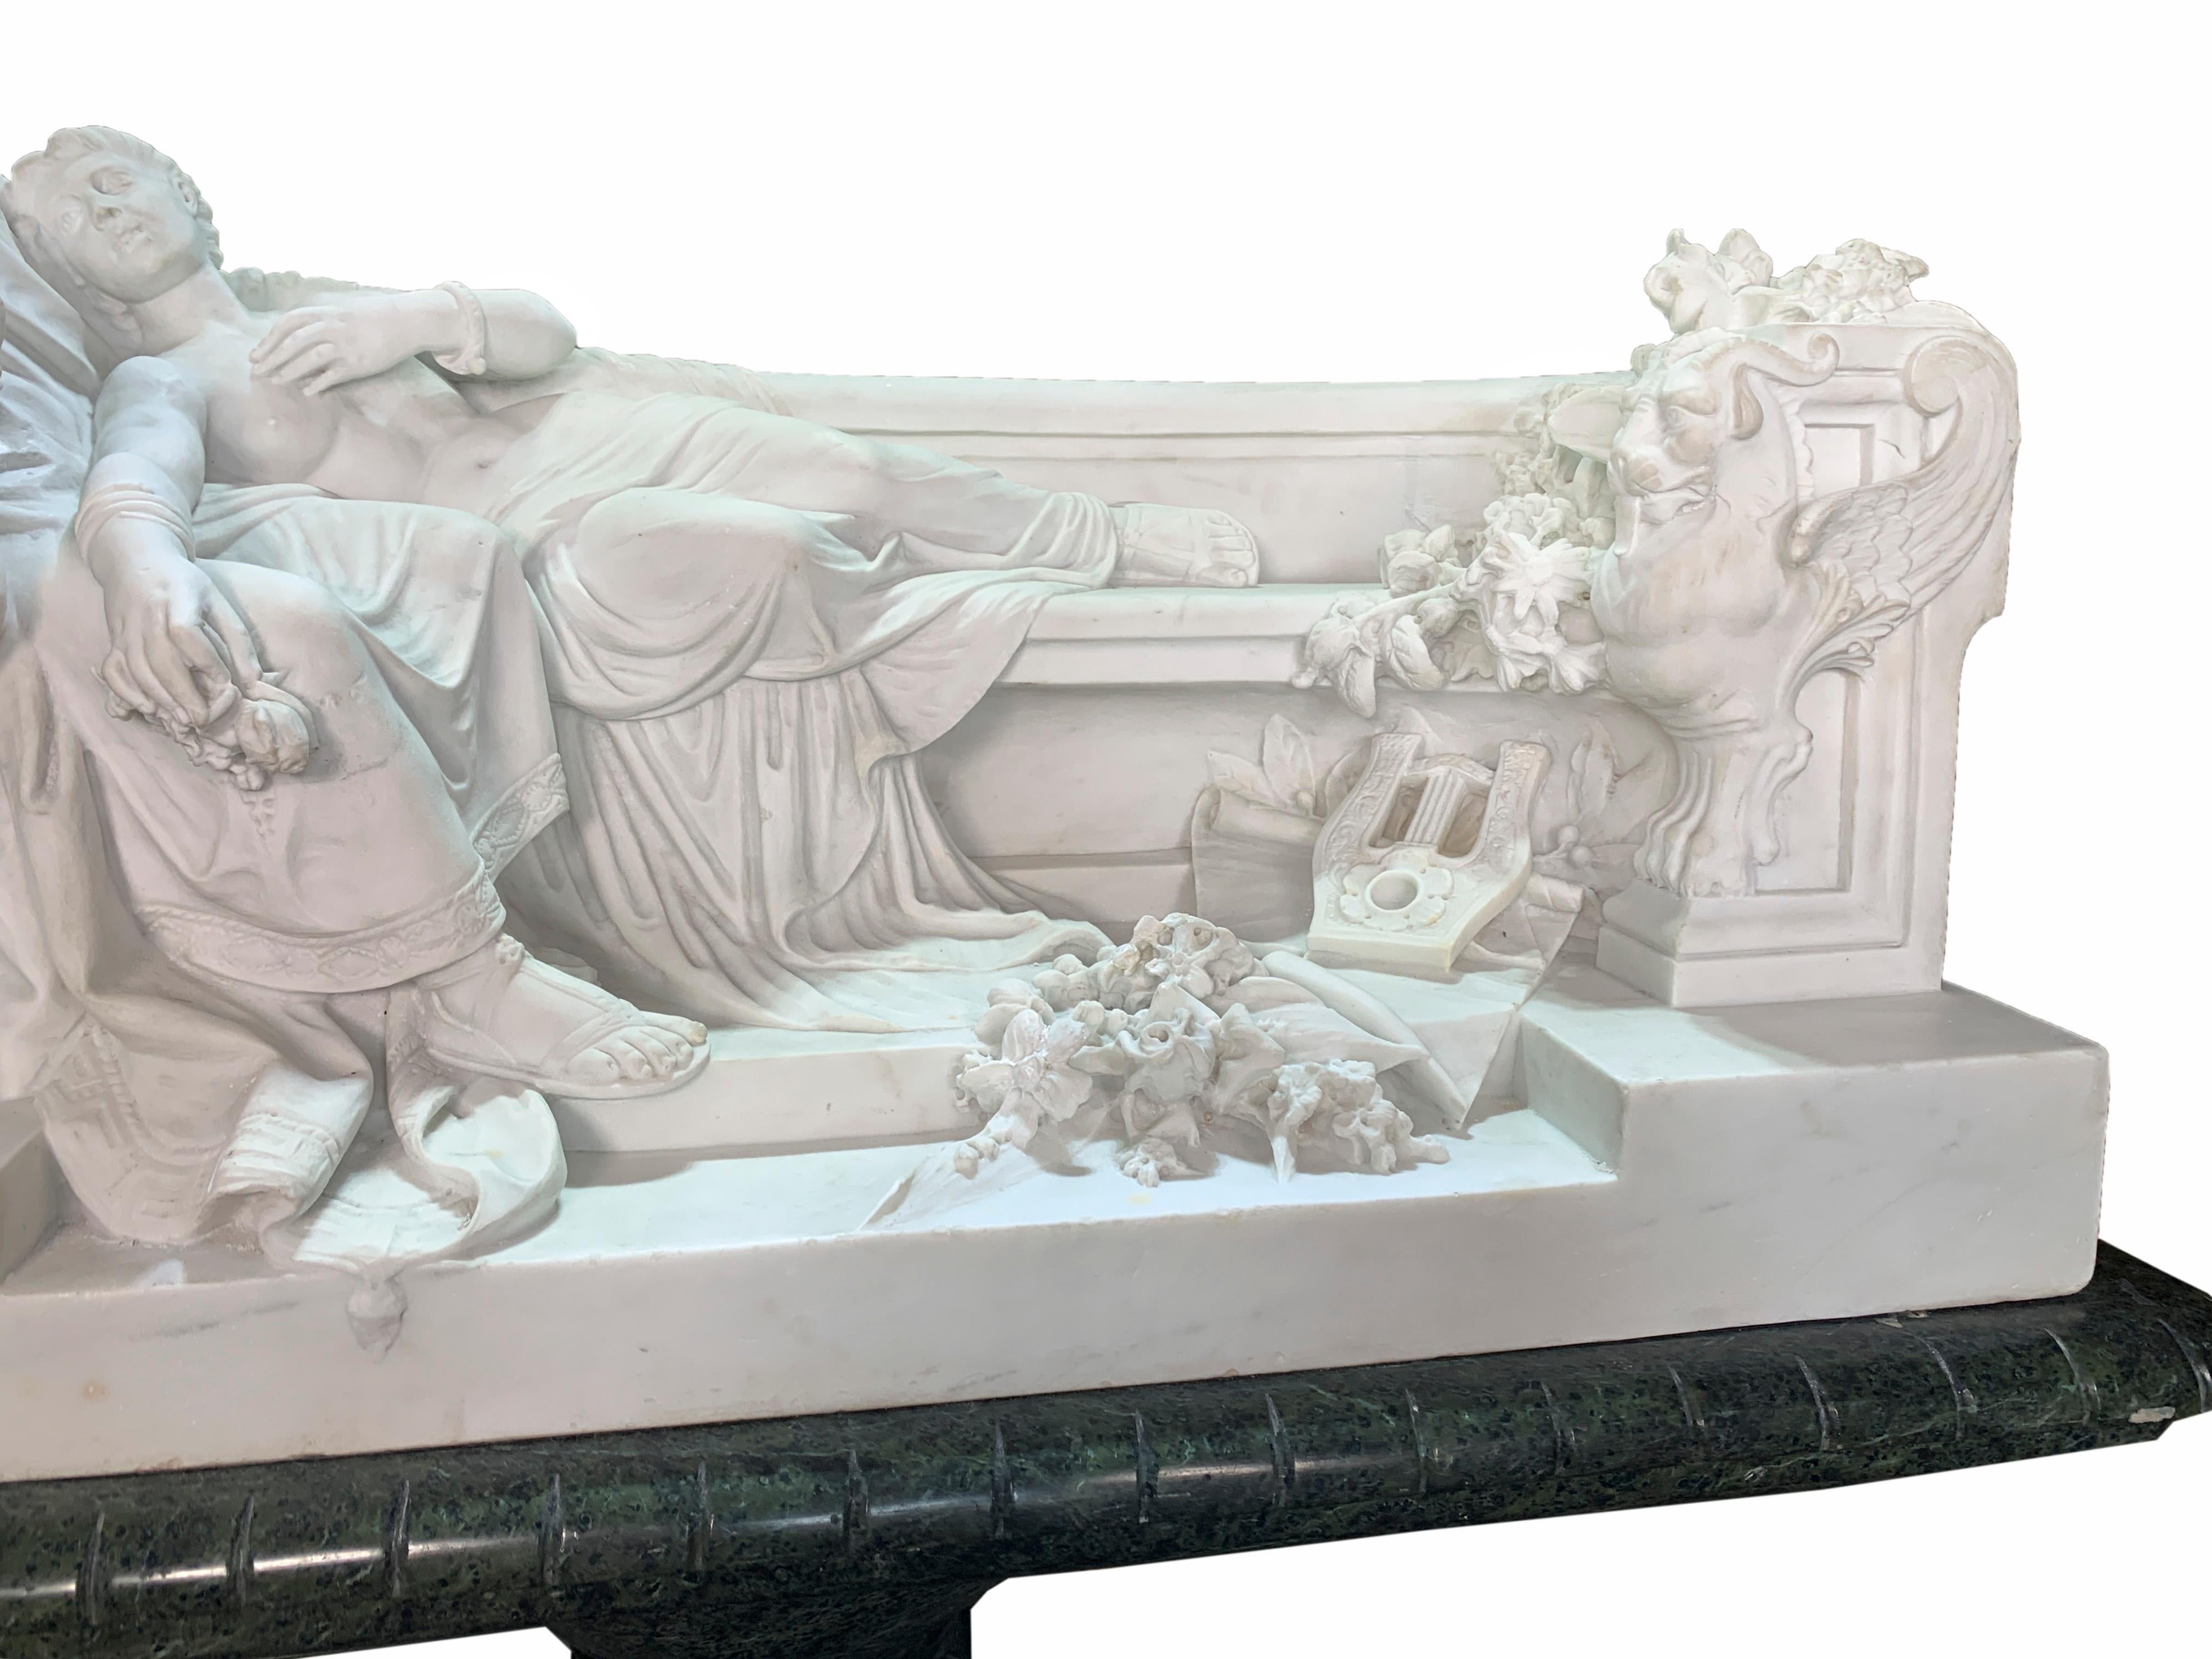 A stunning 19th century Neo-Classical style hand carved white Carrara marble figural group depicting a semi nude lady reclining by a Roman caesar seated on a D-shaped bench flanked by two carved griffins. This remarkable and detailed lovers marble